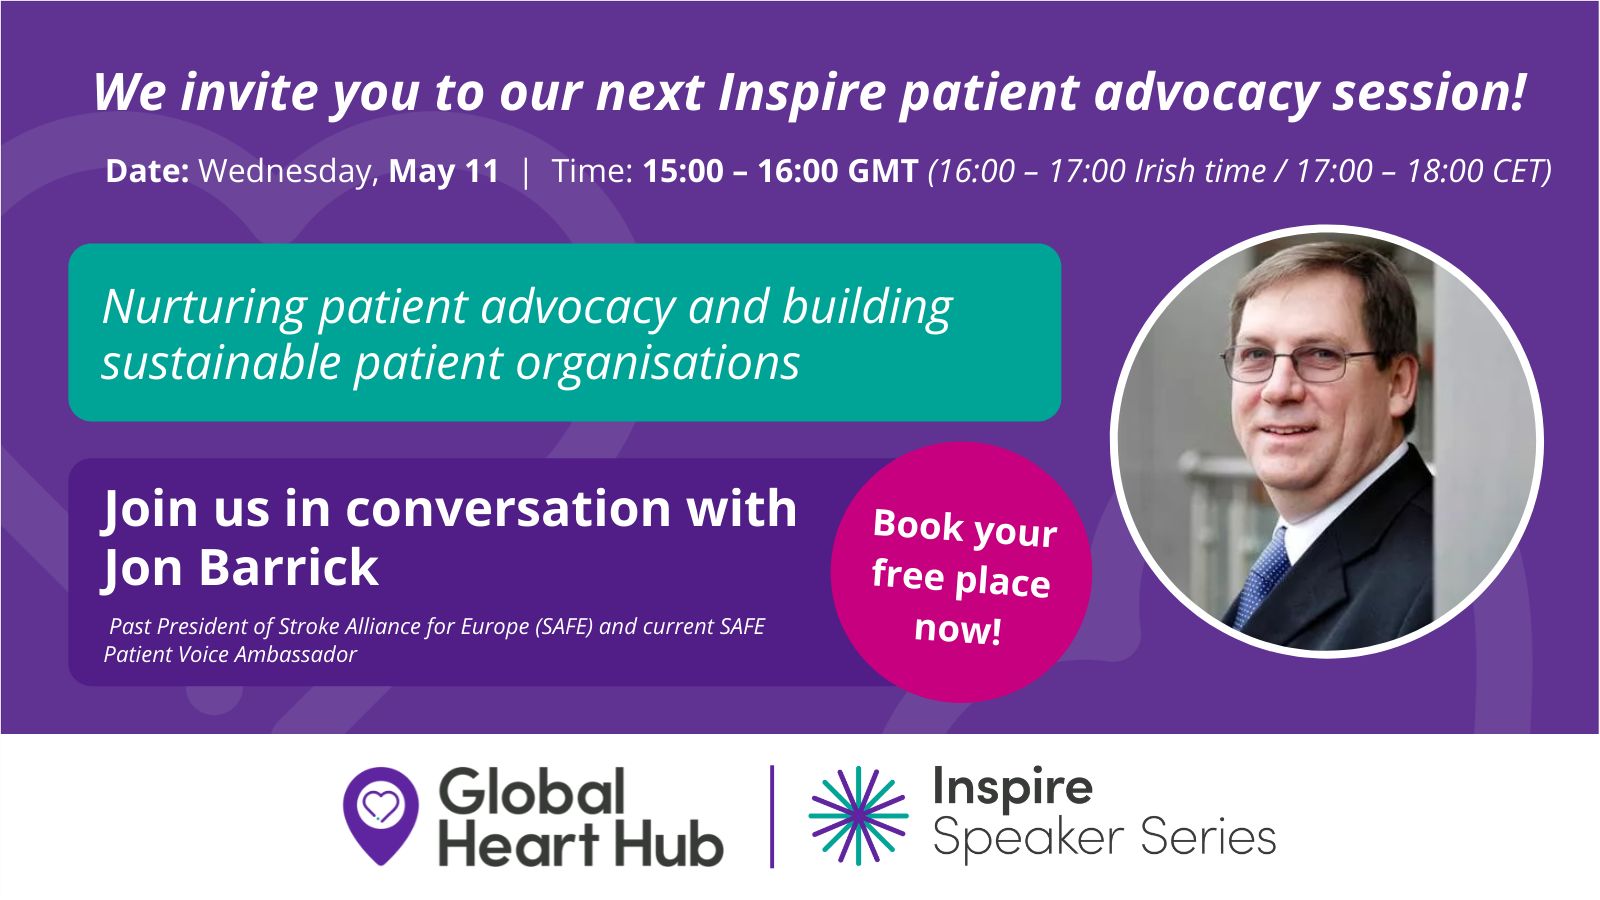 Book your place on the next Inspire Patient Advocacy Event